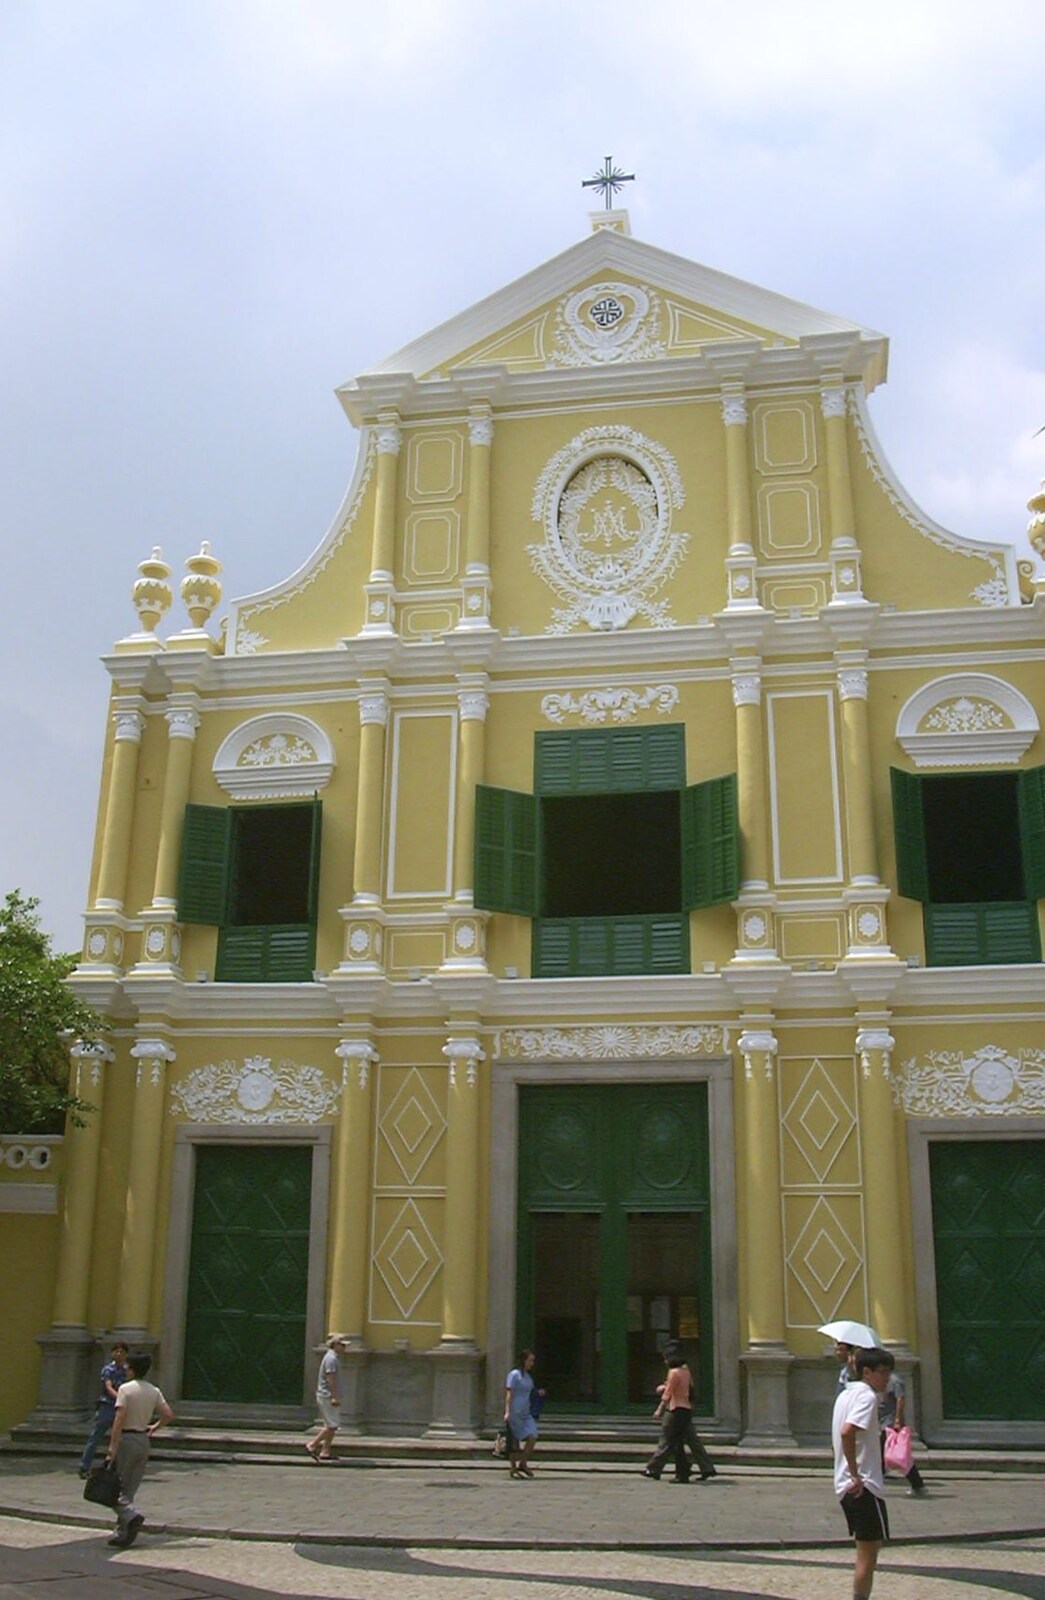 A Day Trip to Macau, China - 16th August 2001: The early 17th-century St. Dominic's Church